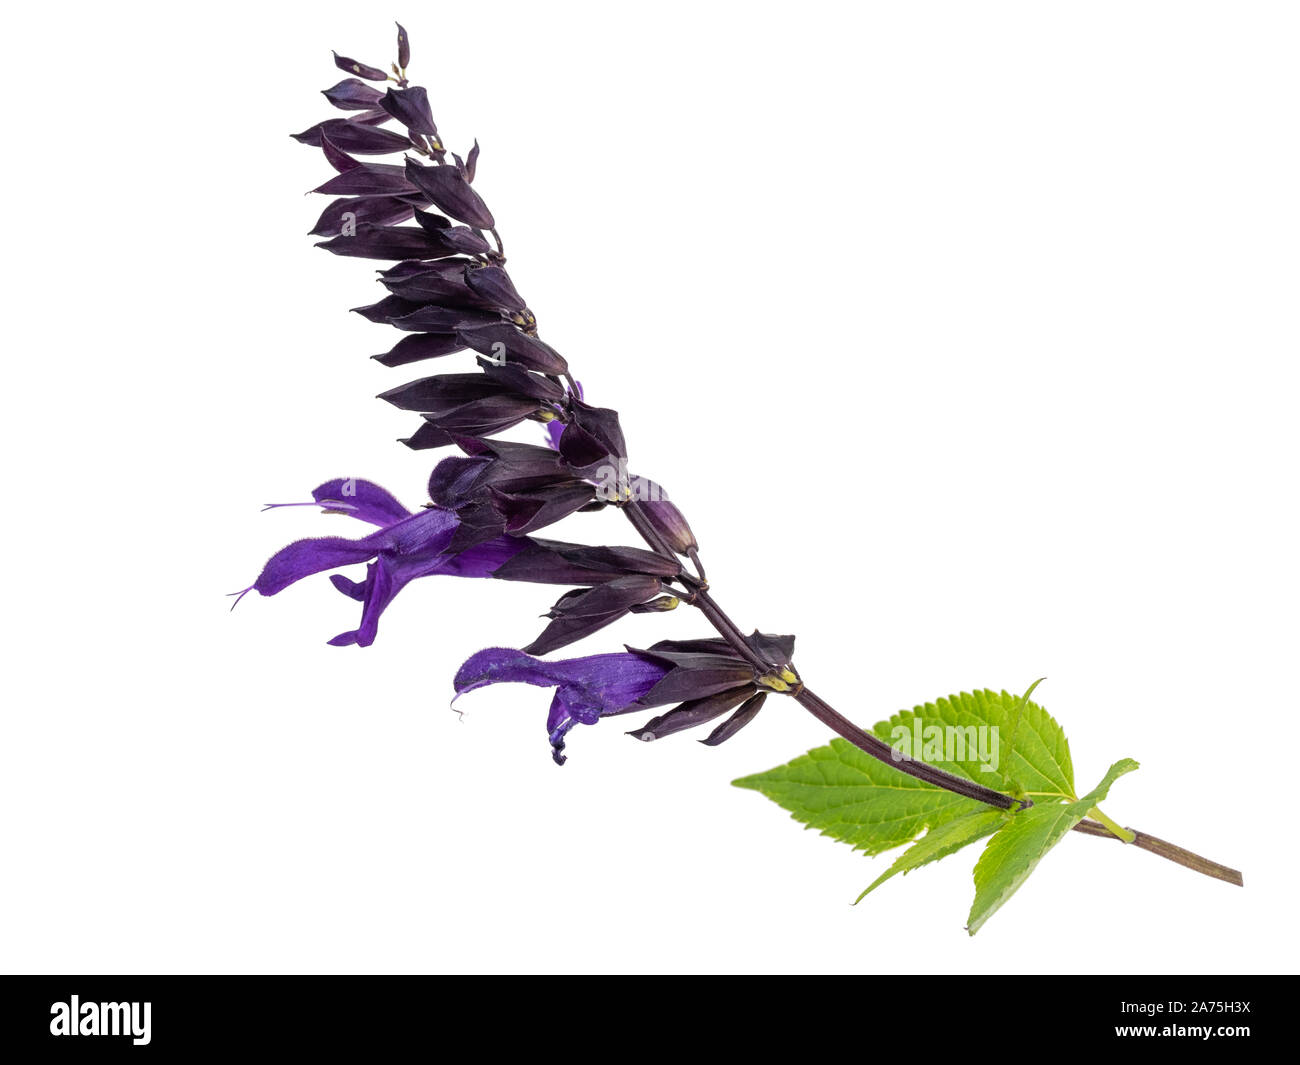 Single flower stem of the purple bloomed half hardy shrubby sage, Salvia 'Amistad' on a white background Stock Photo